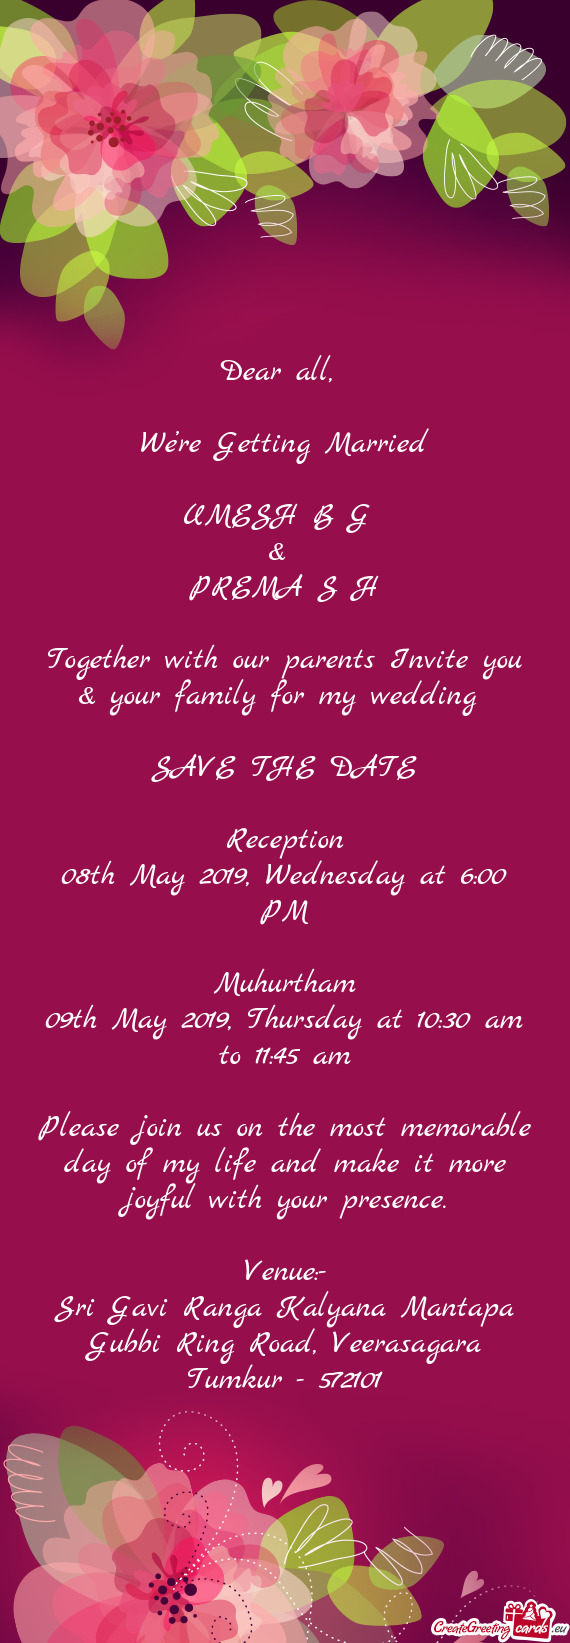 Please join us on the most memorable day of my life and make it more joyful with your presence